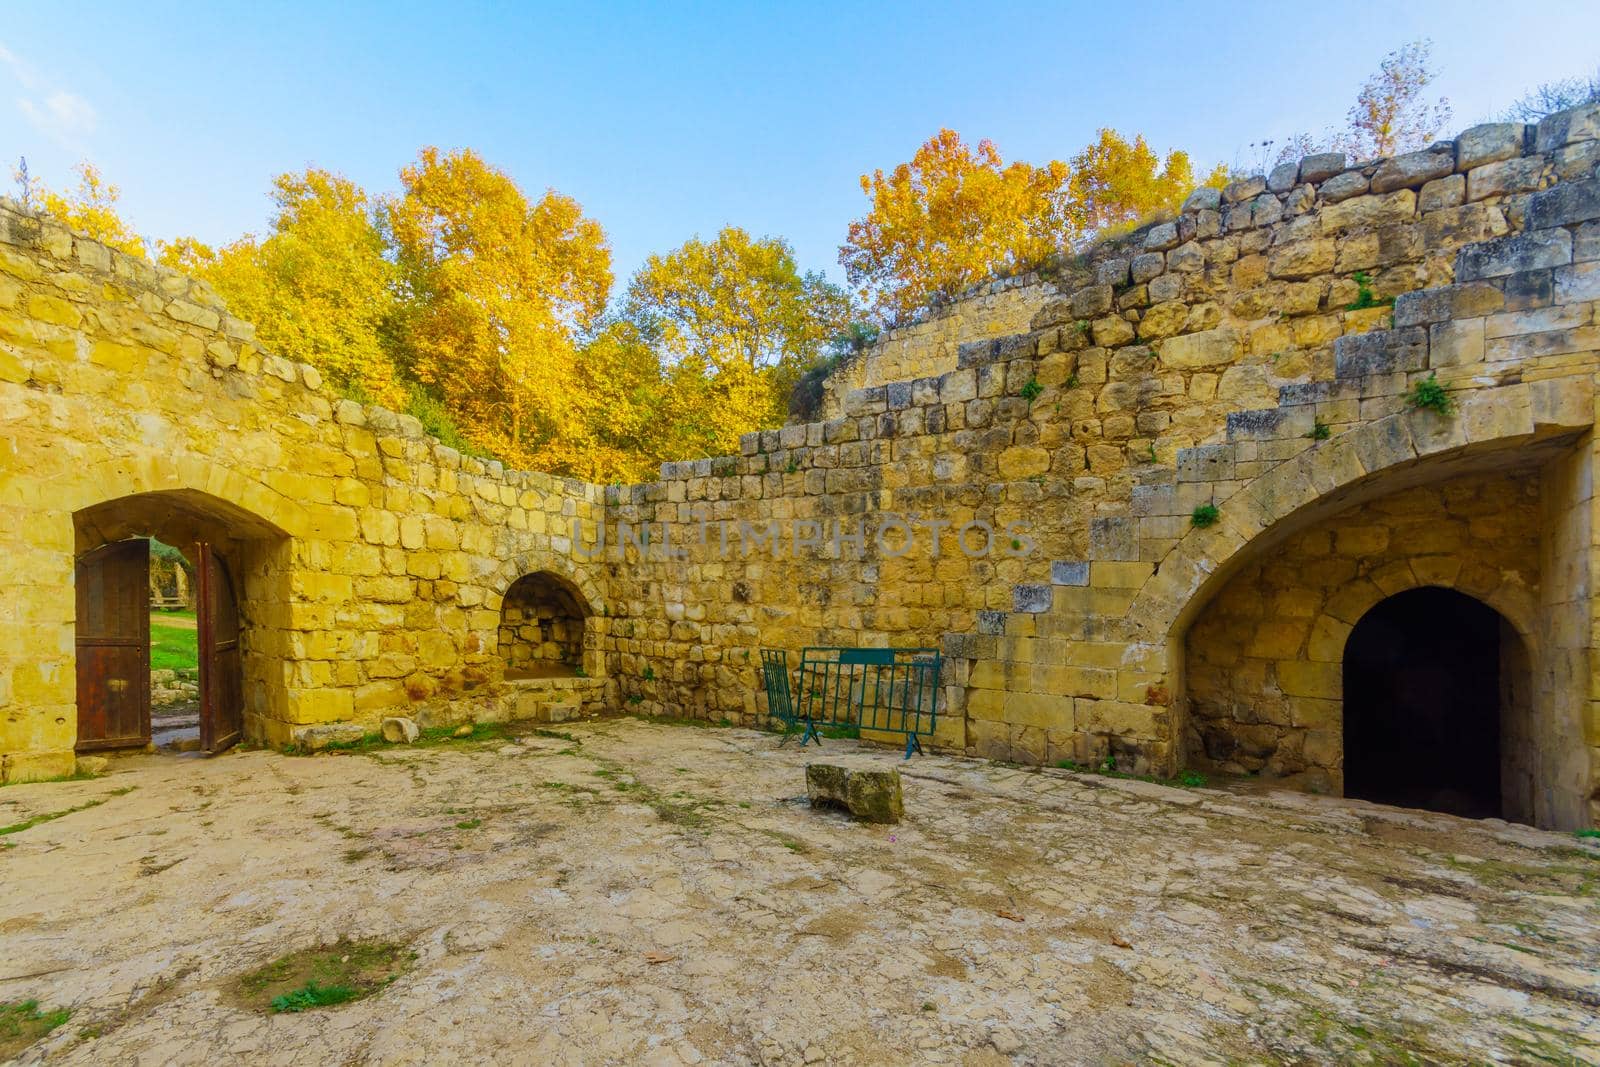 View of a Crusader farmhouse, with trees, and fall foliage in En Hemed National Park (Aqua Bella), west of Jerusalem, Israel